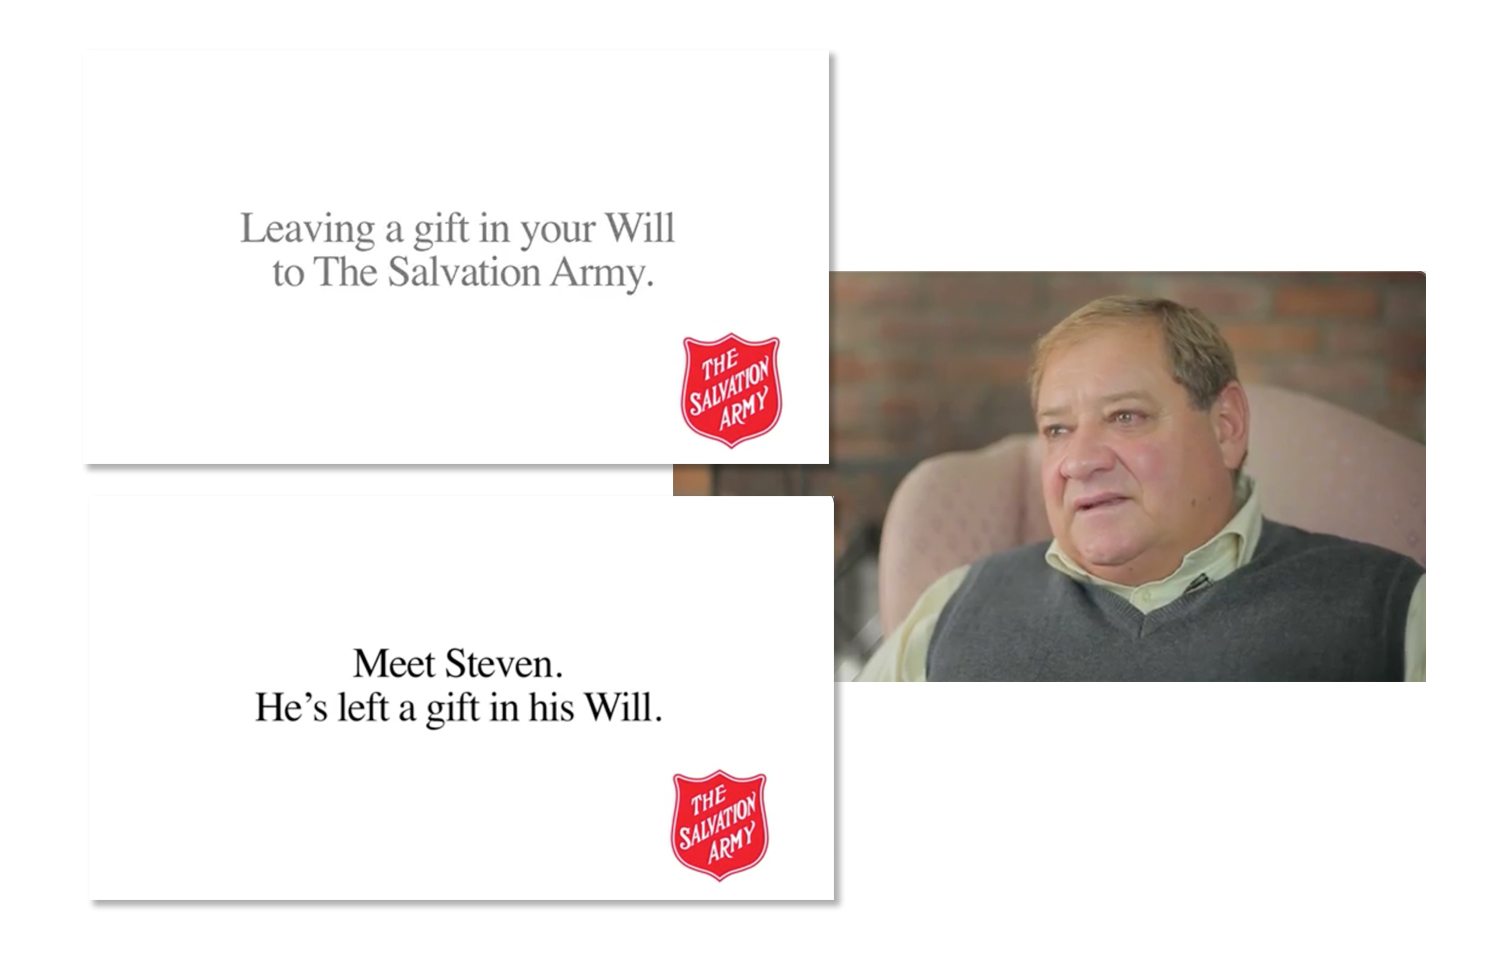 The Salvation Army commercial